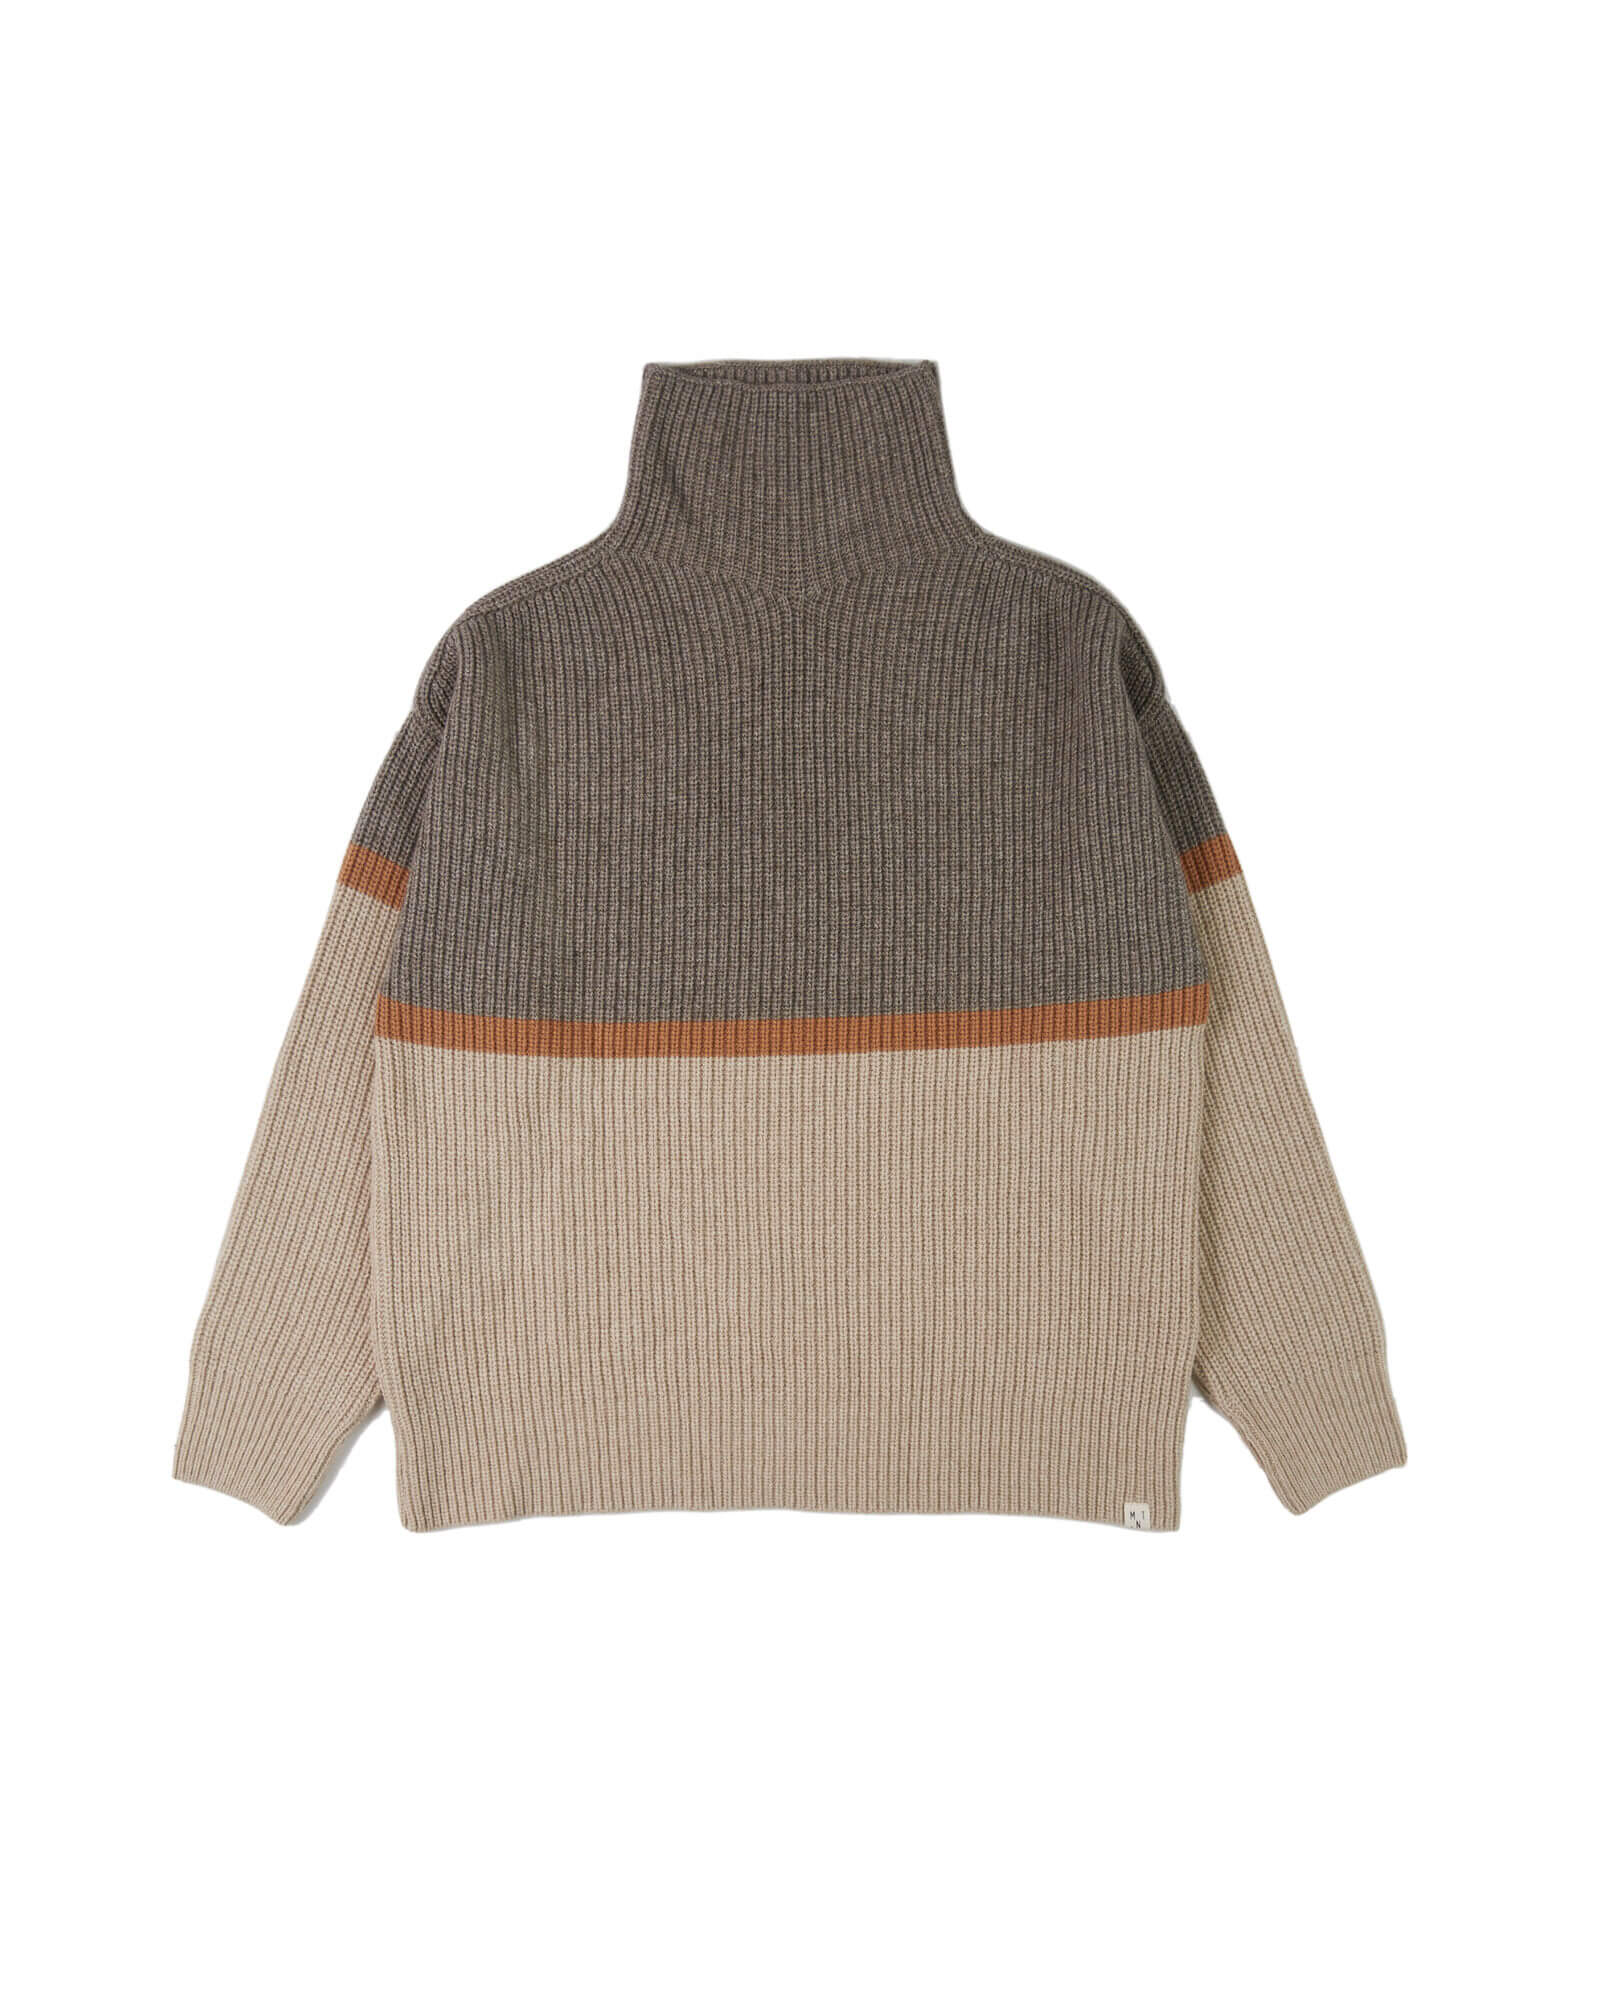 Colorful color block sweater made from recycled wool from Matona